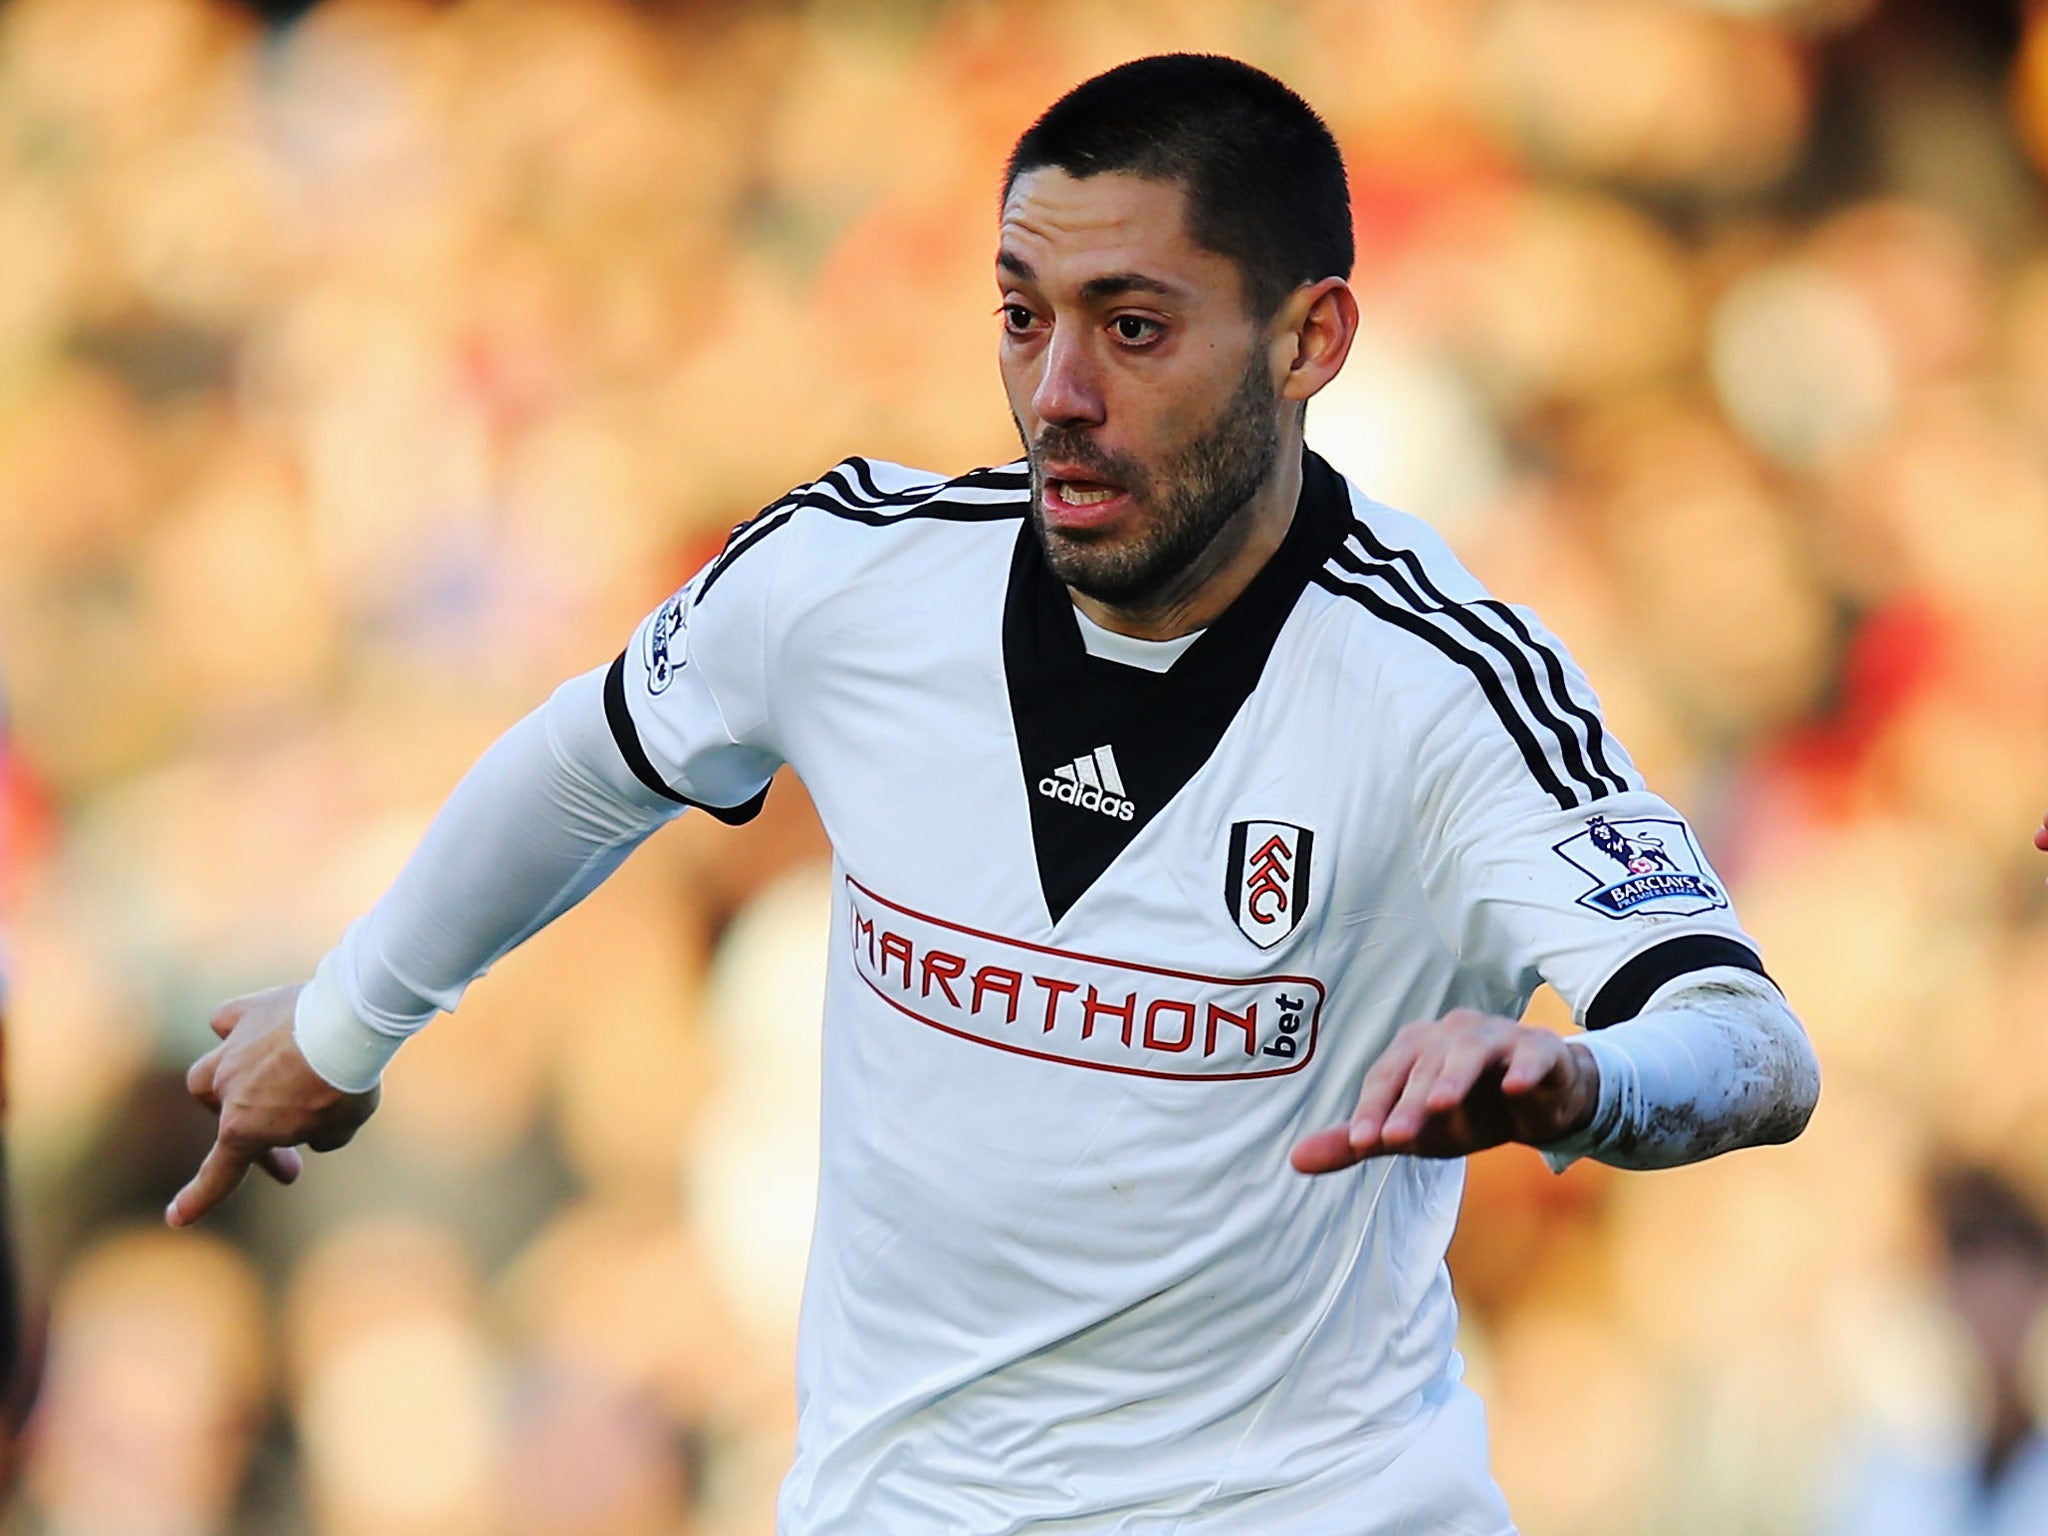 Clint Dempsey cleared to play again after heart problems, Seattle Sounders